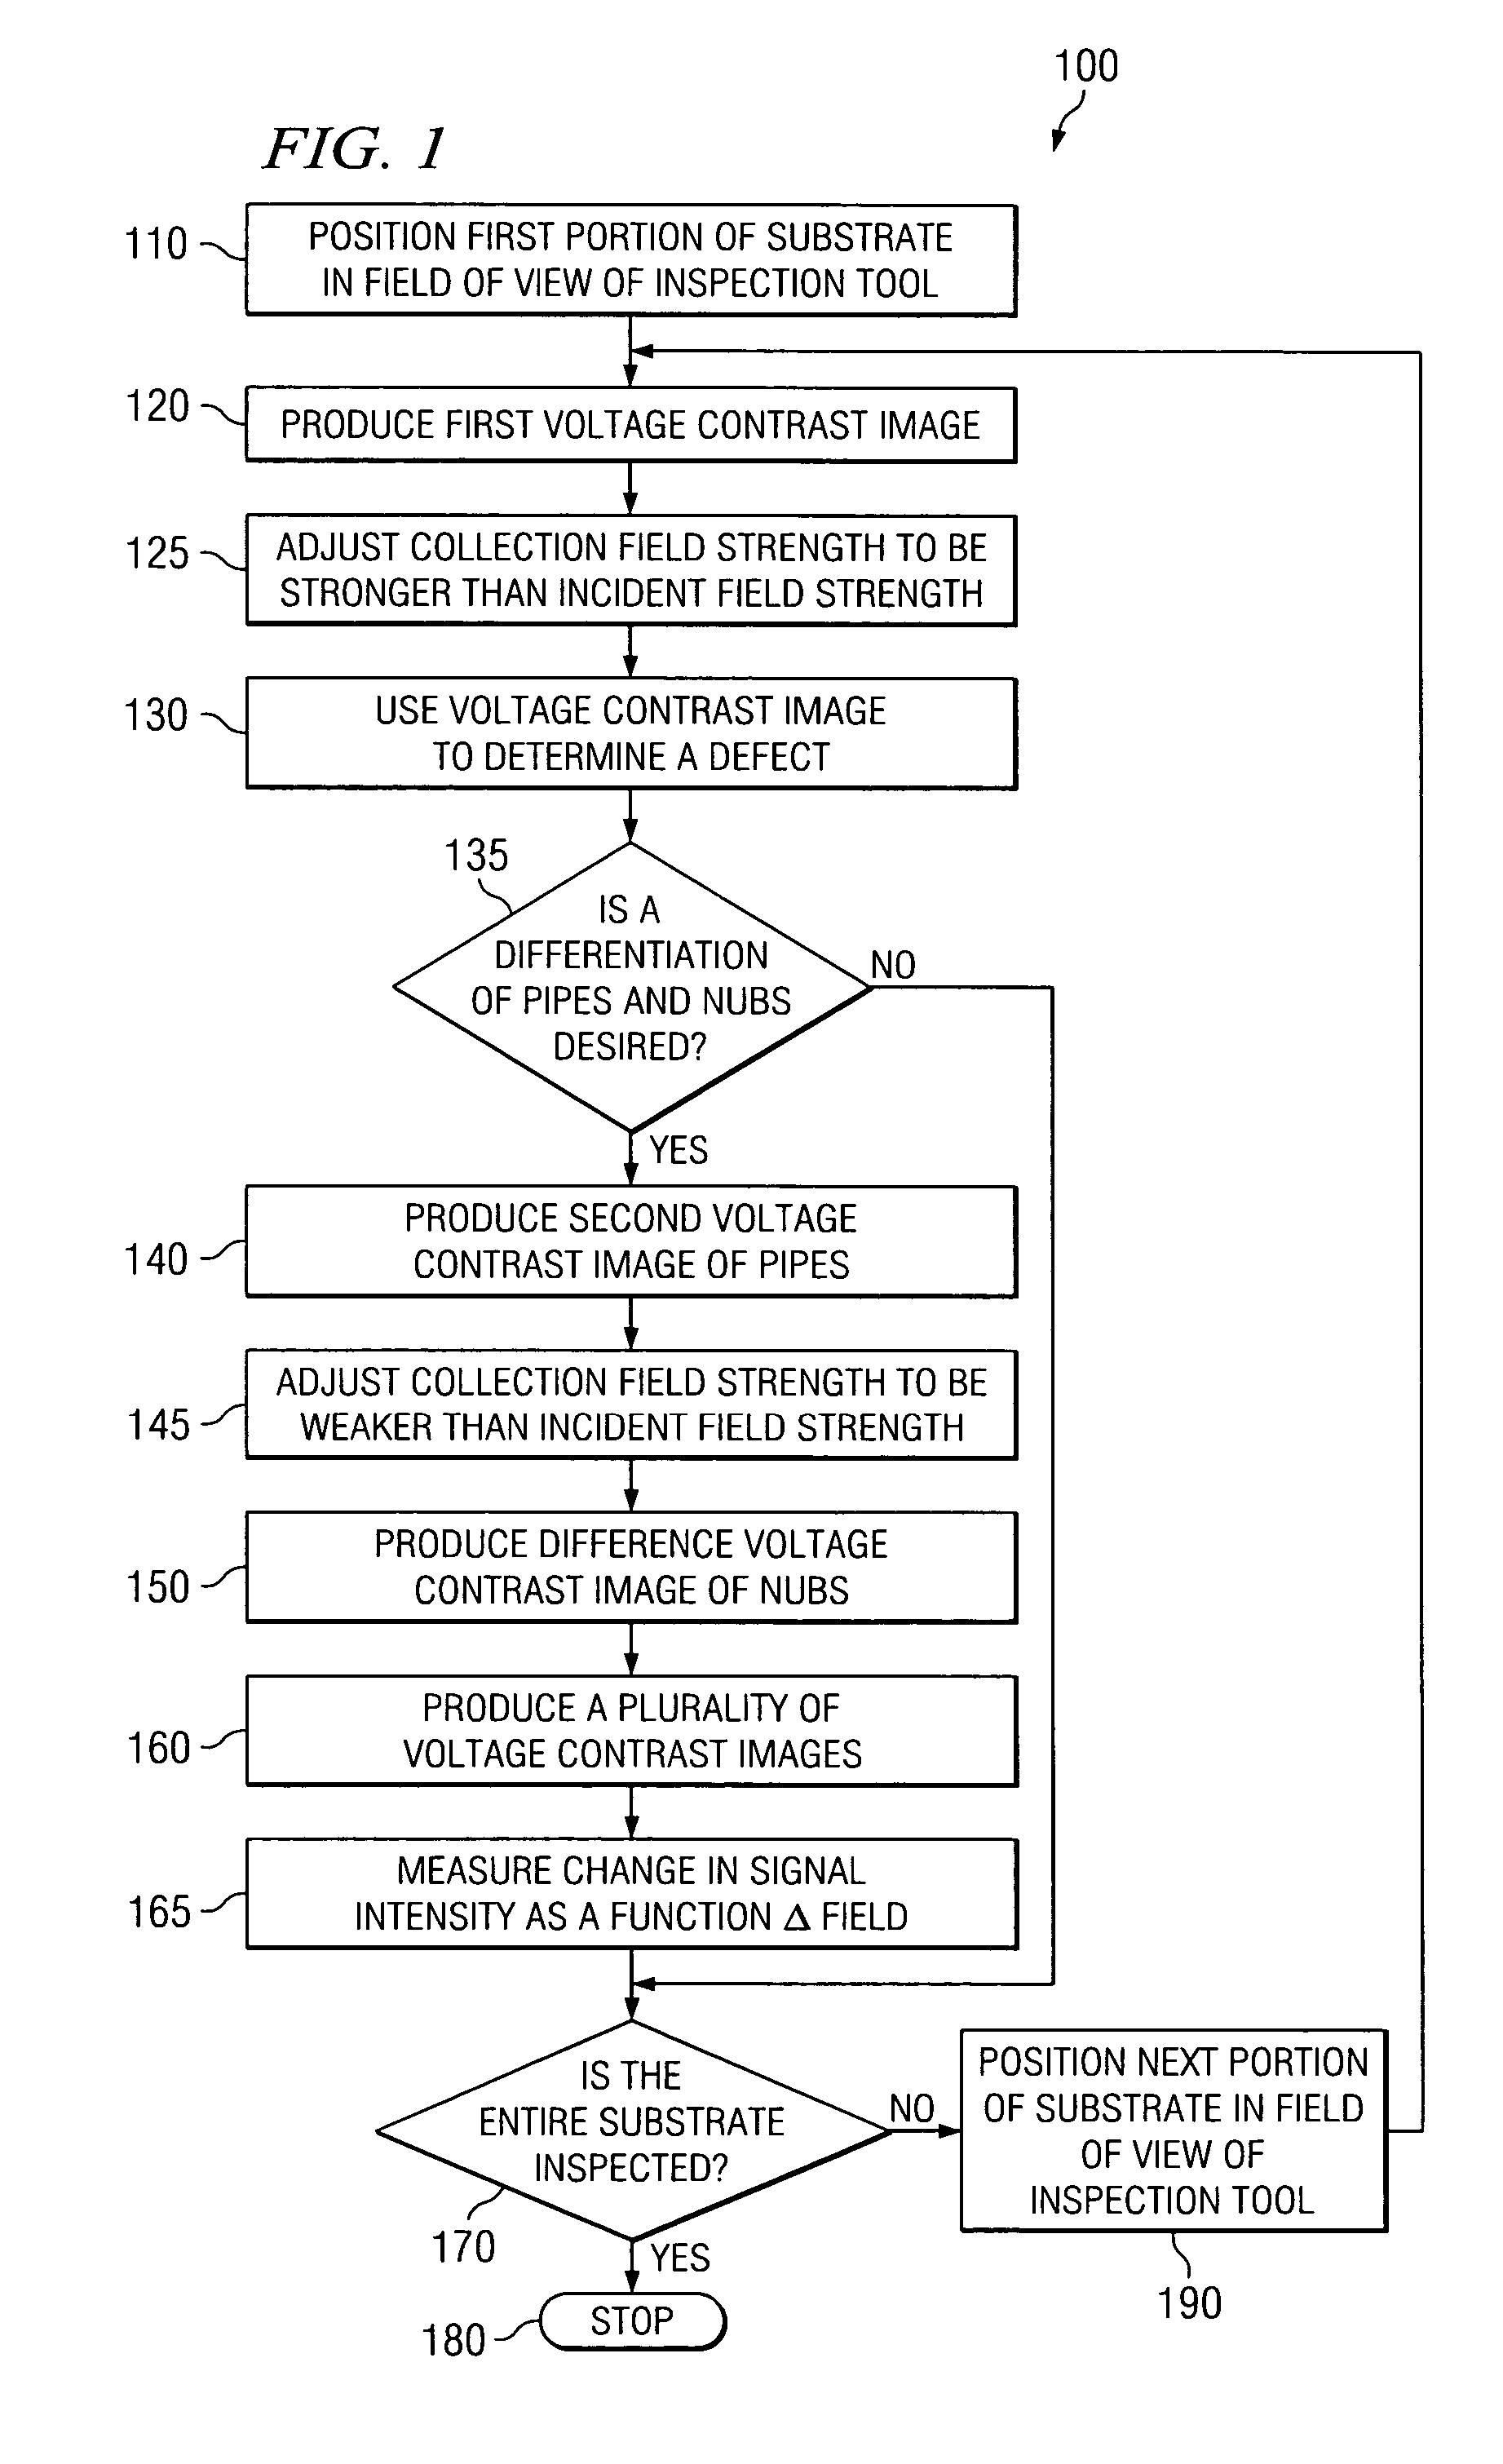 Method to detect and predict metal silicide defects in a microelectronic device during the manufacture of an integrated circuit